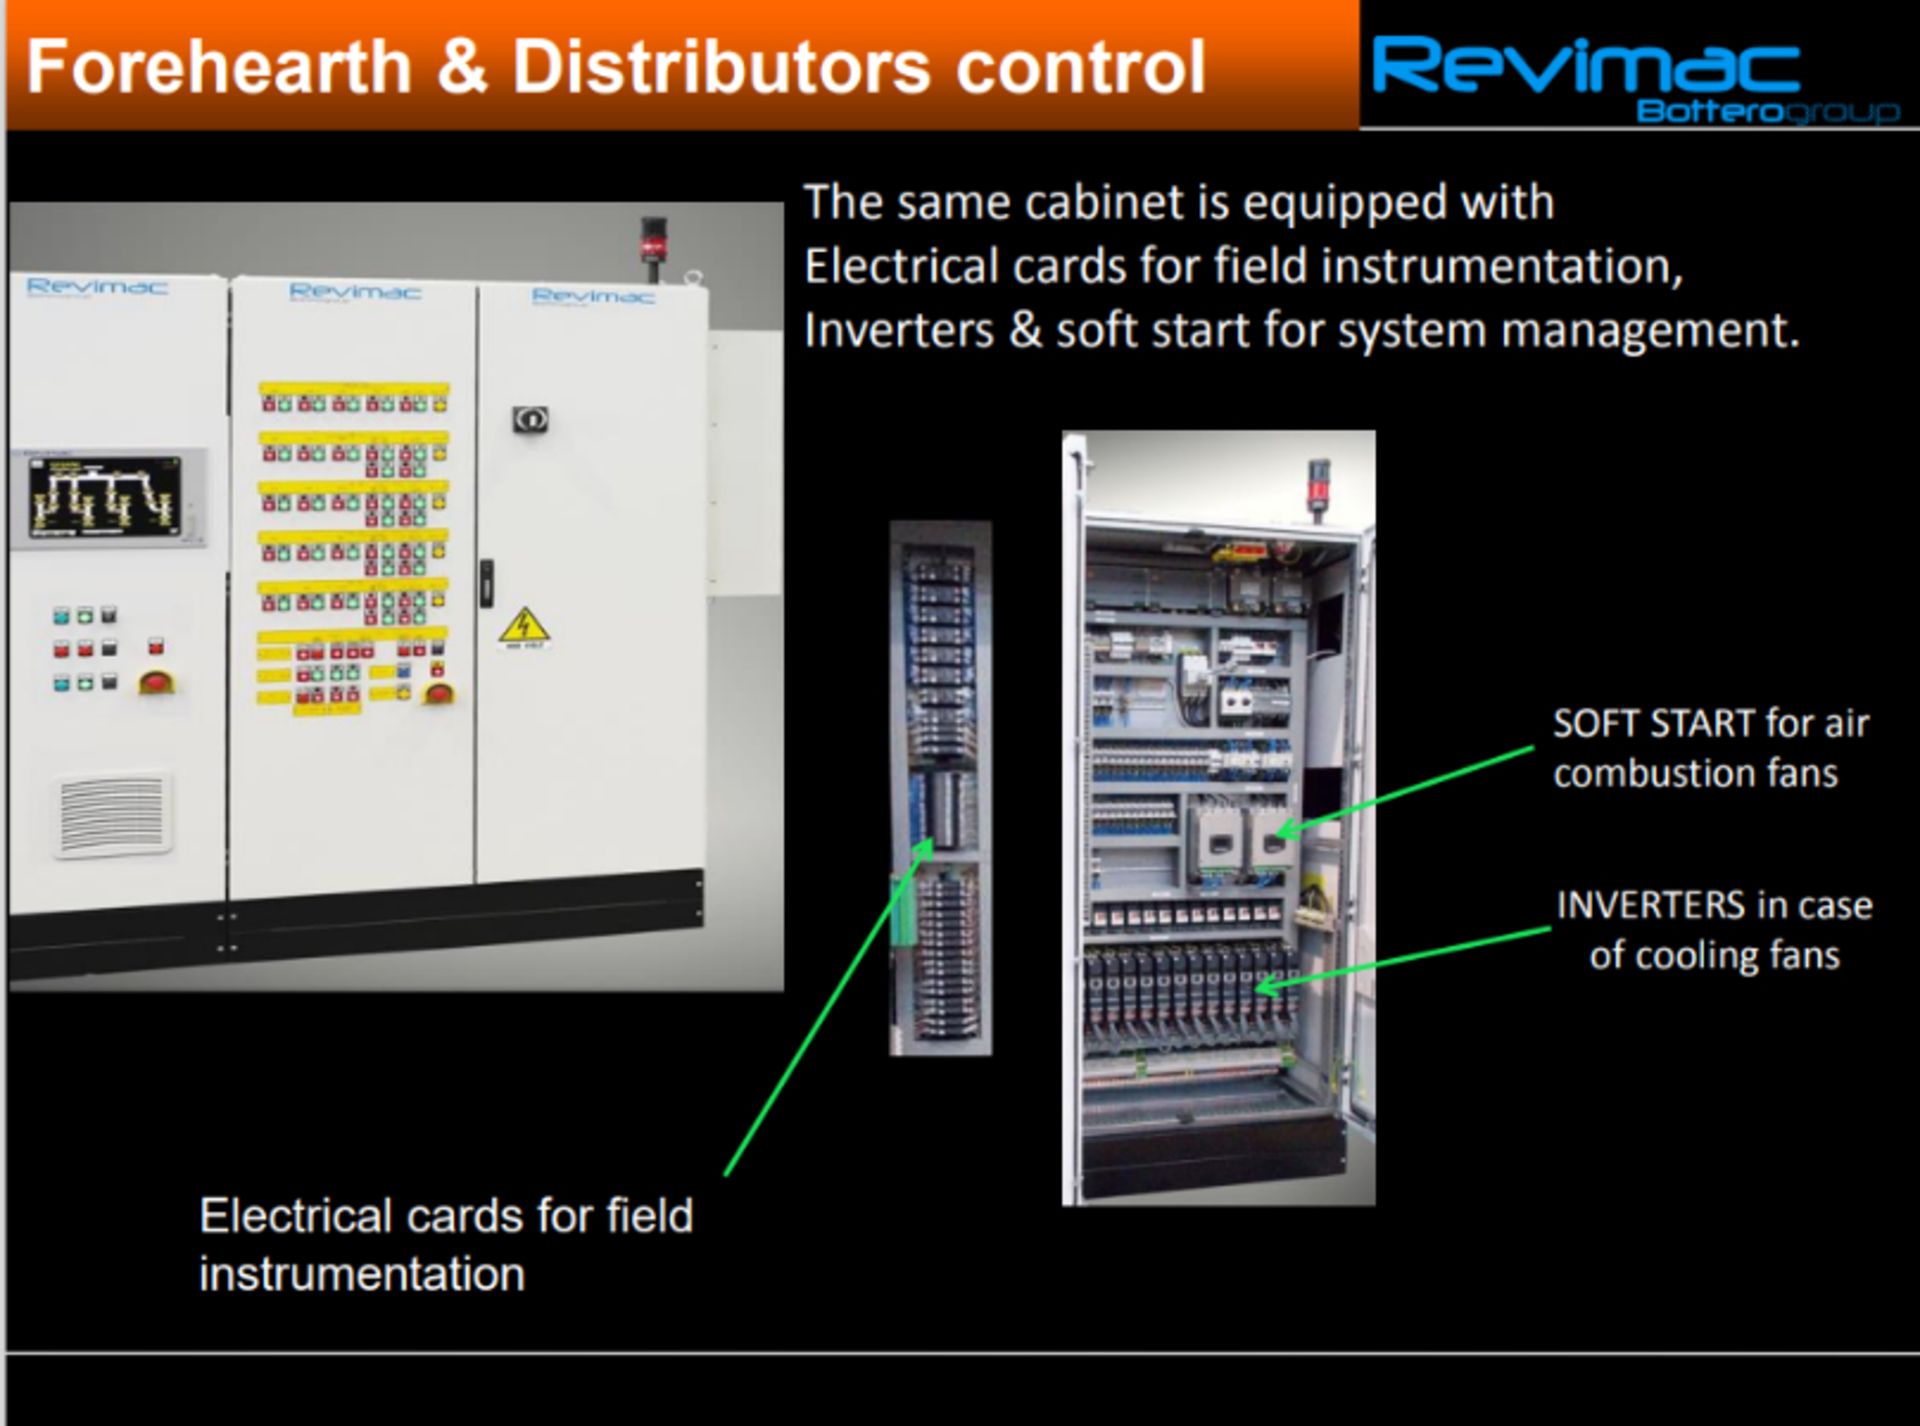 Revimac Forehearth Control System *Subject to Confirmation* - Image 11 of 18